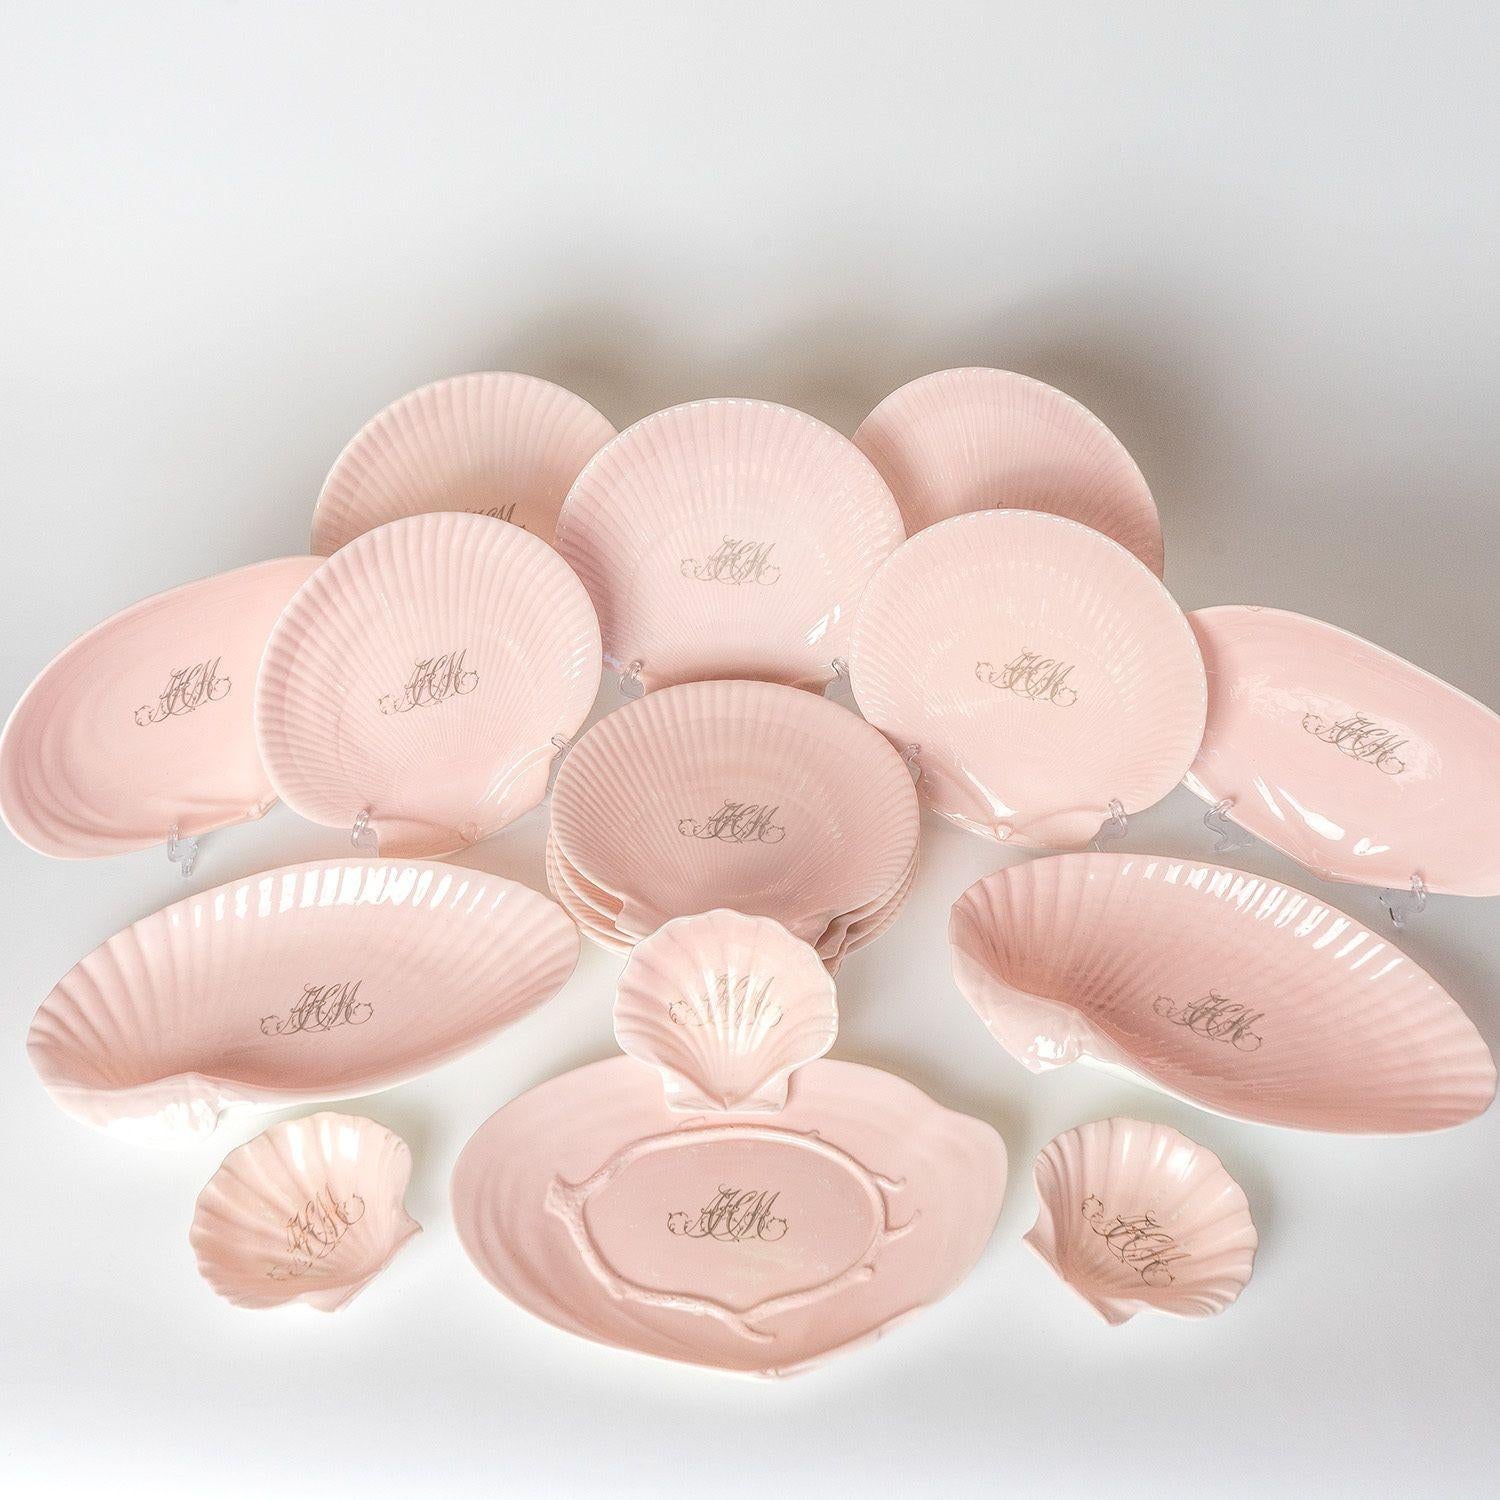 Pink Porcelain 'Nautilus' Dessert Service by Wedgwood for John Mortlock, 1880s For Sale 2